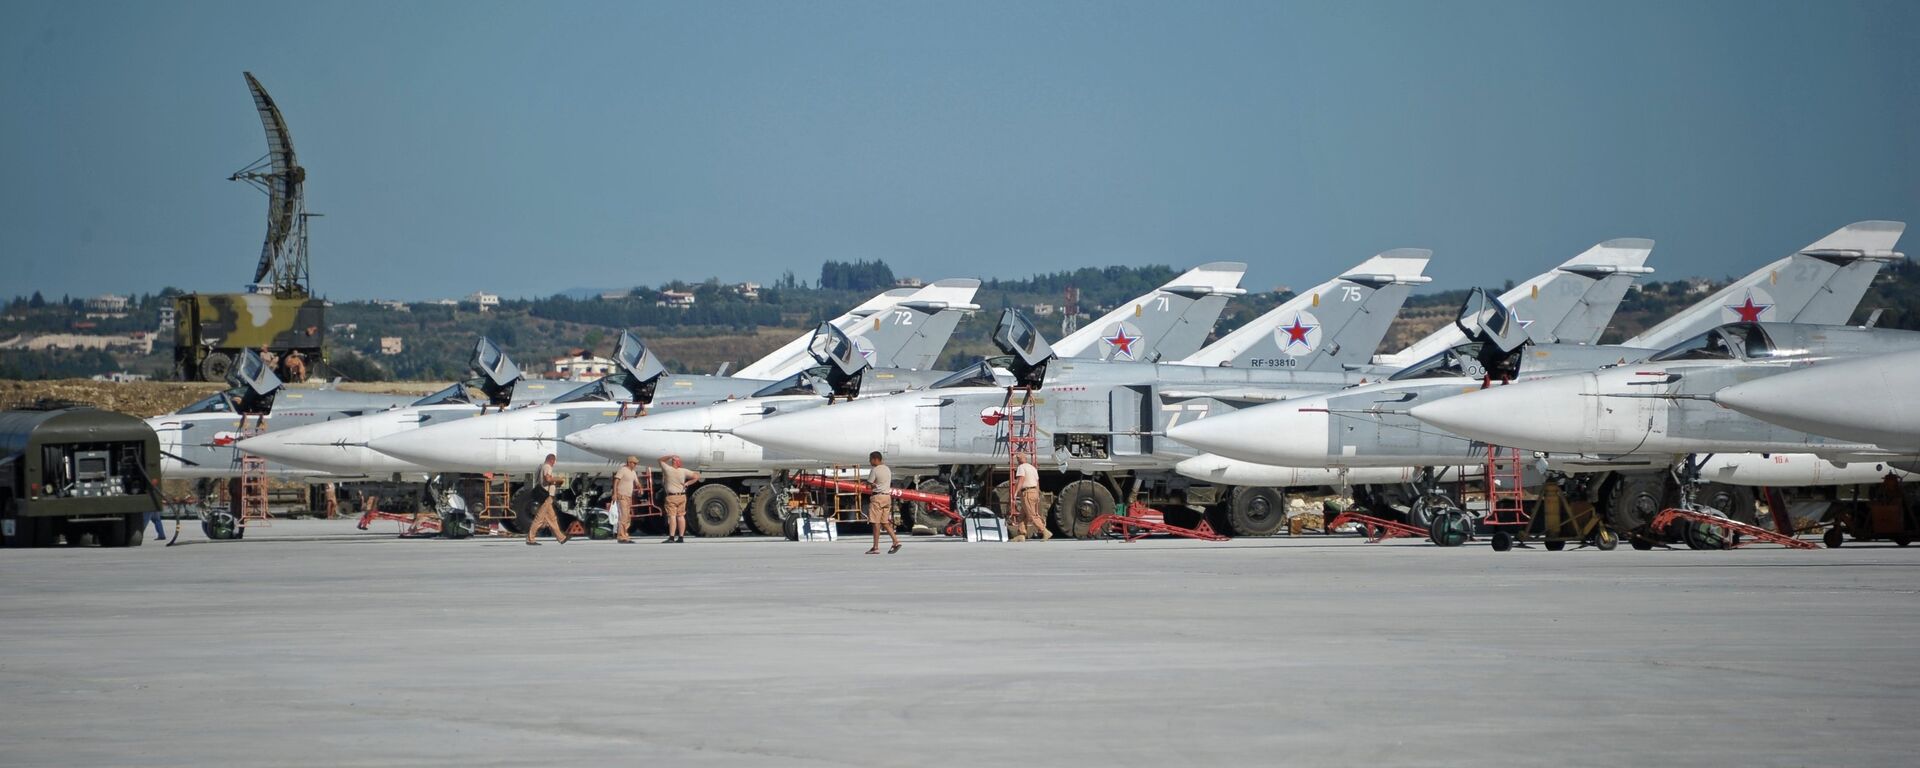 Su-24 bombers of the Russian Aerospace Forces at the Khmeimim airbase in Syria. - Sputnik International, 1920, 23.04.2022